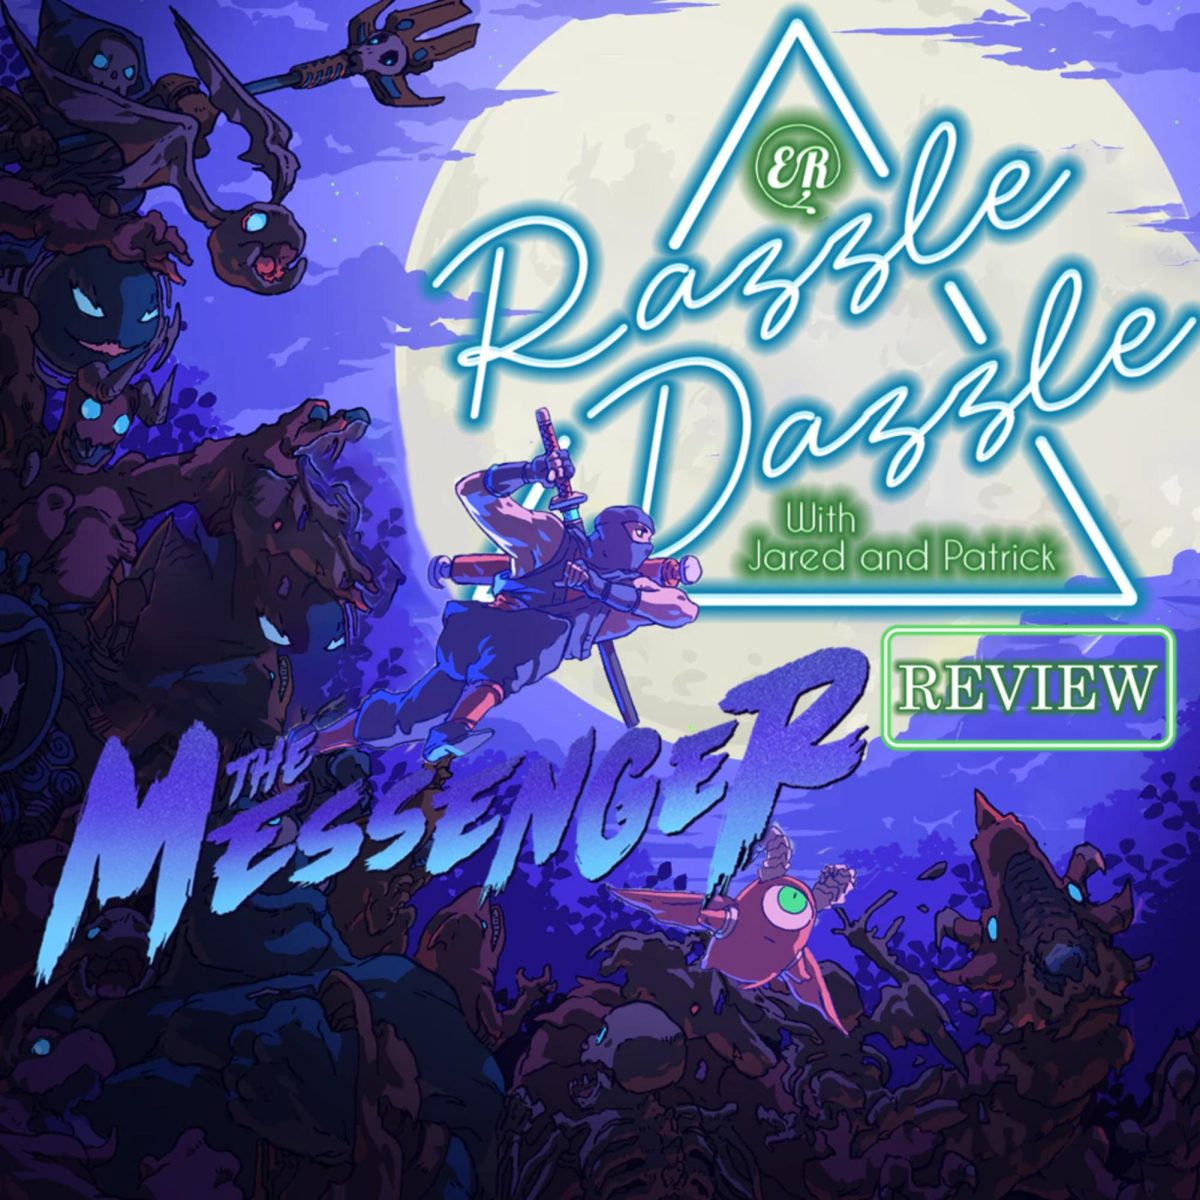 Review 3: The Messenger